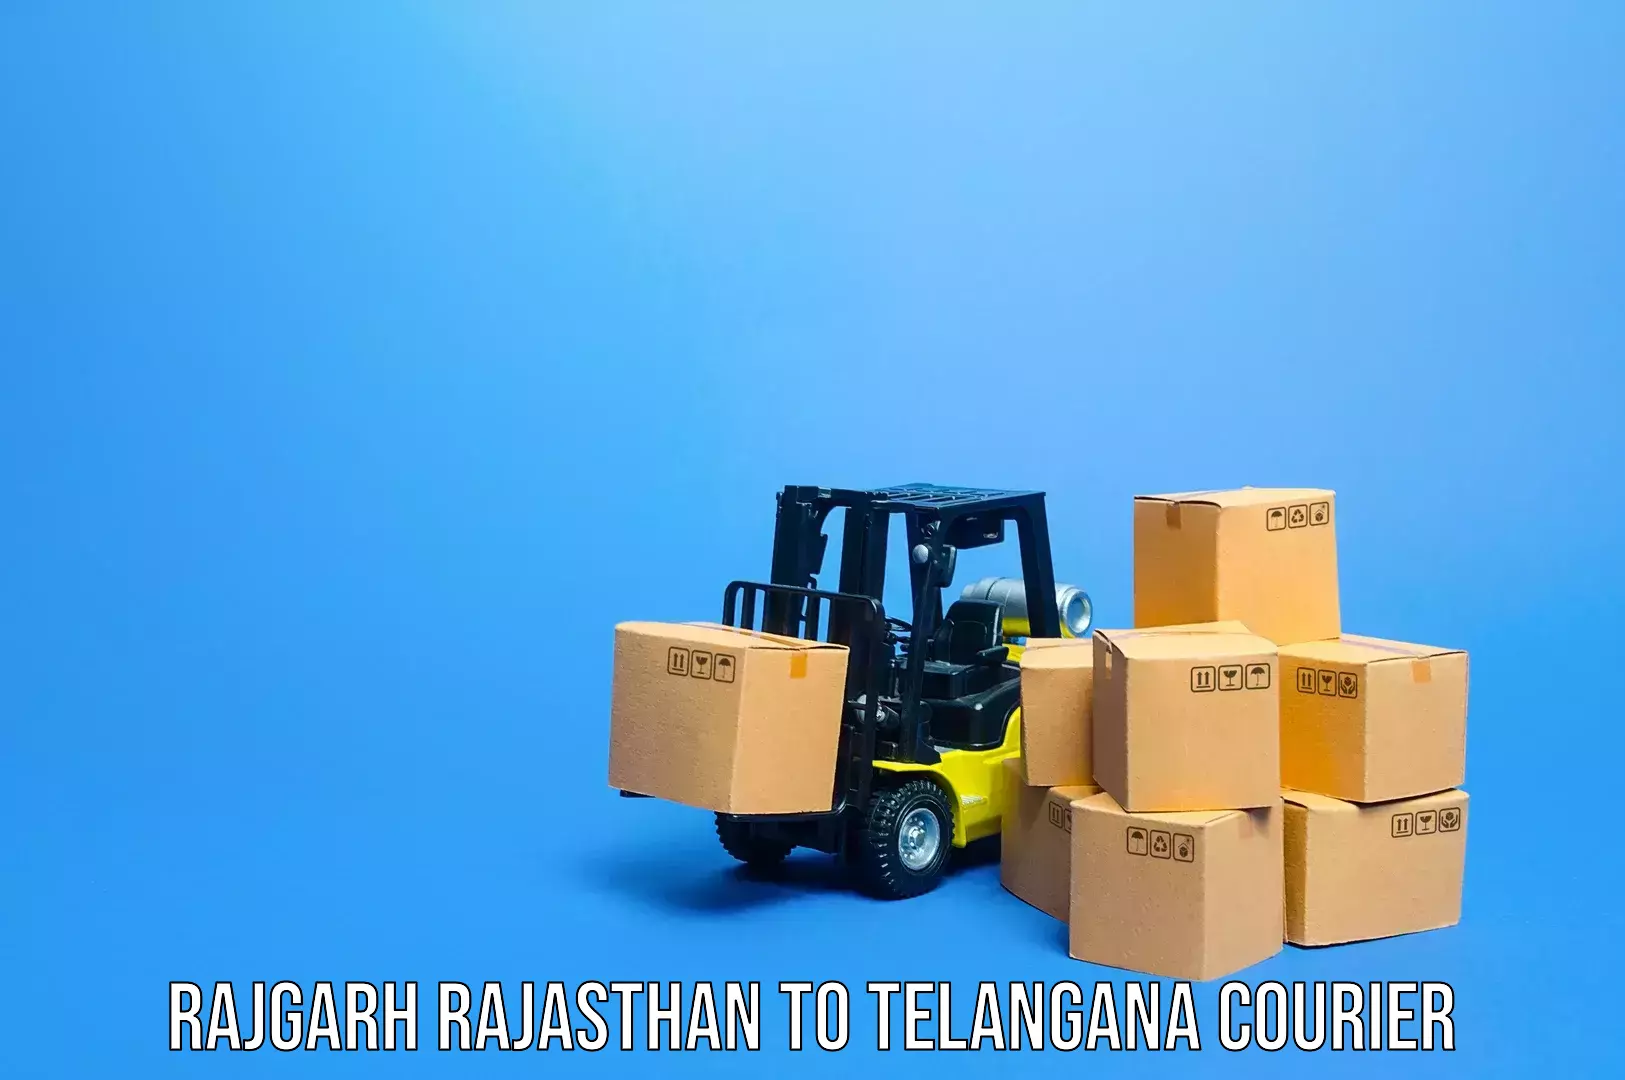 Luggage delivery operations Rajgarh Rajasthan to Khairatabad